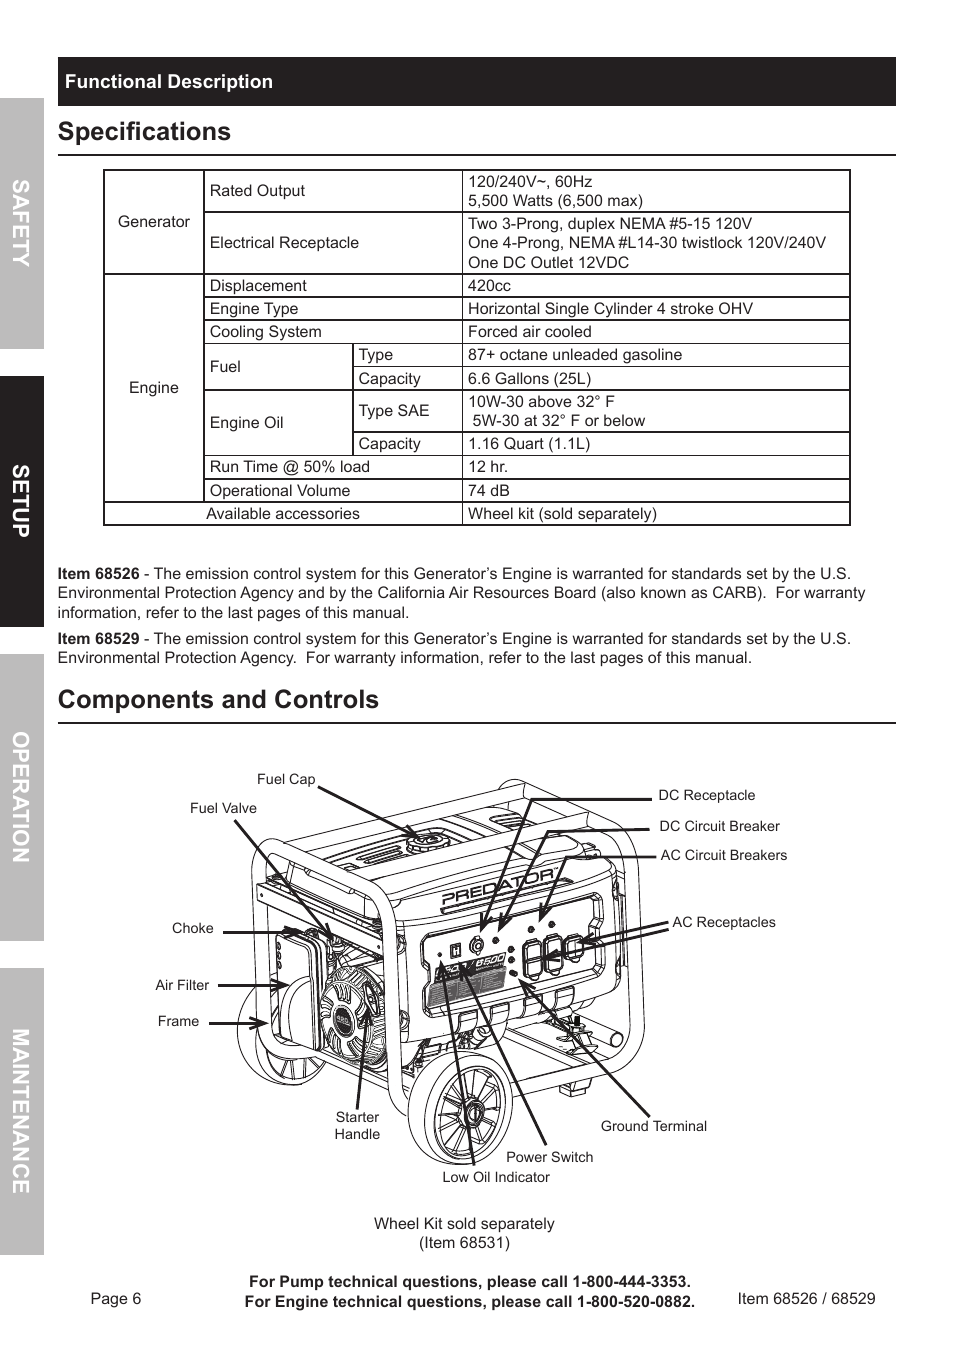 Specifications, Components and controls, Safety o pera ... l14 20 wiring diagram 